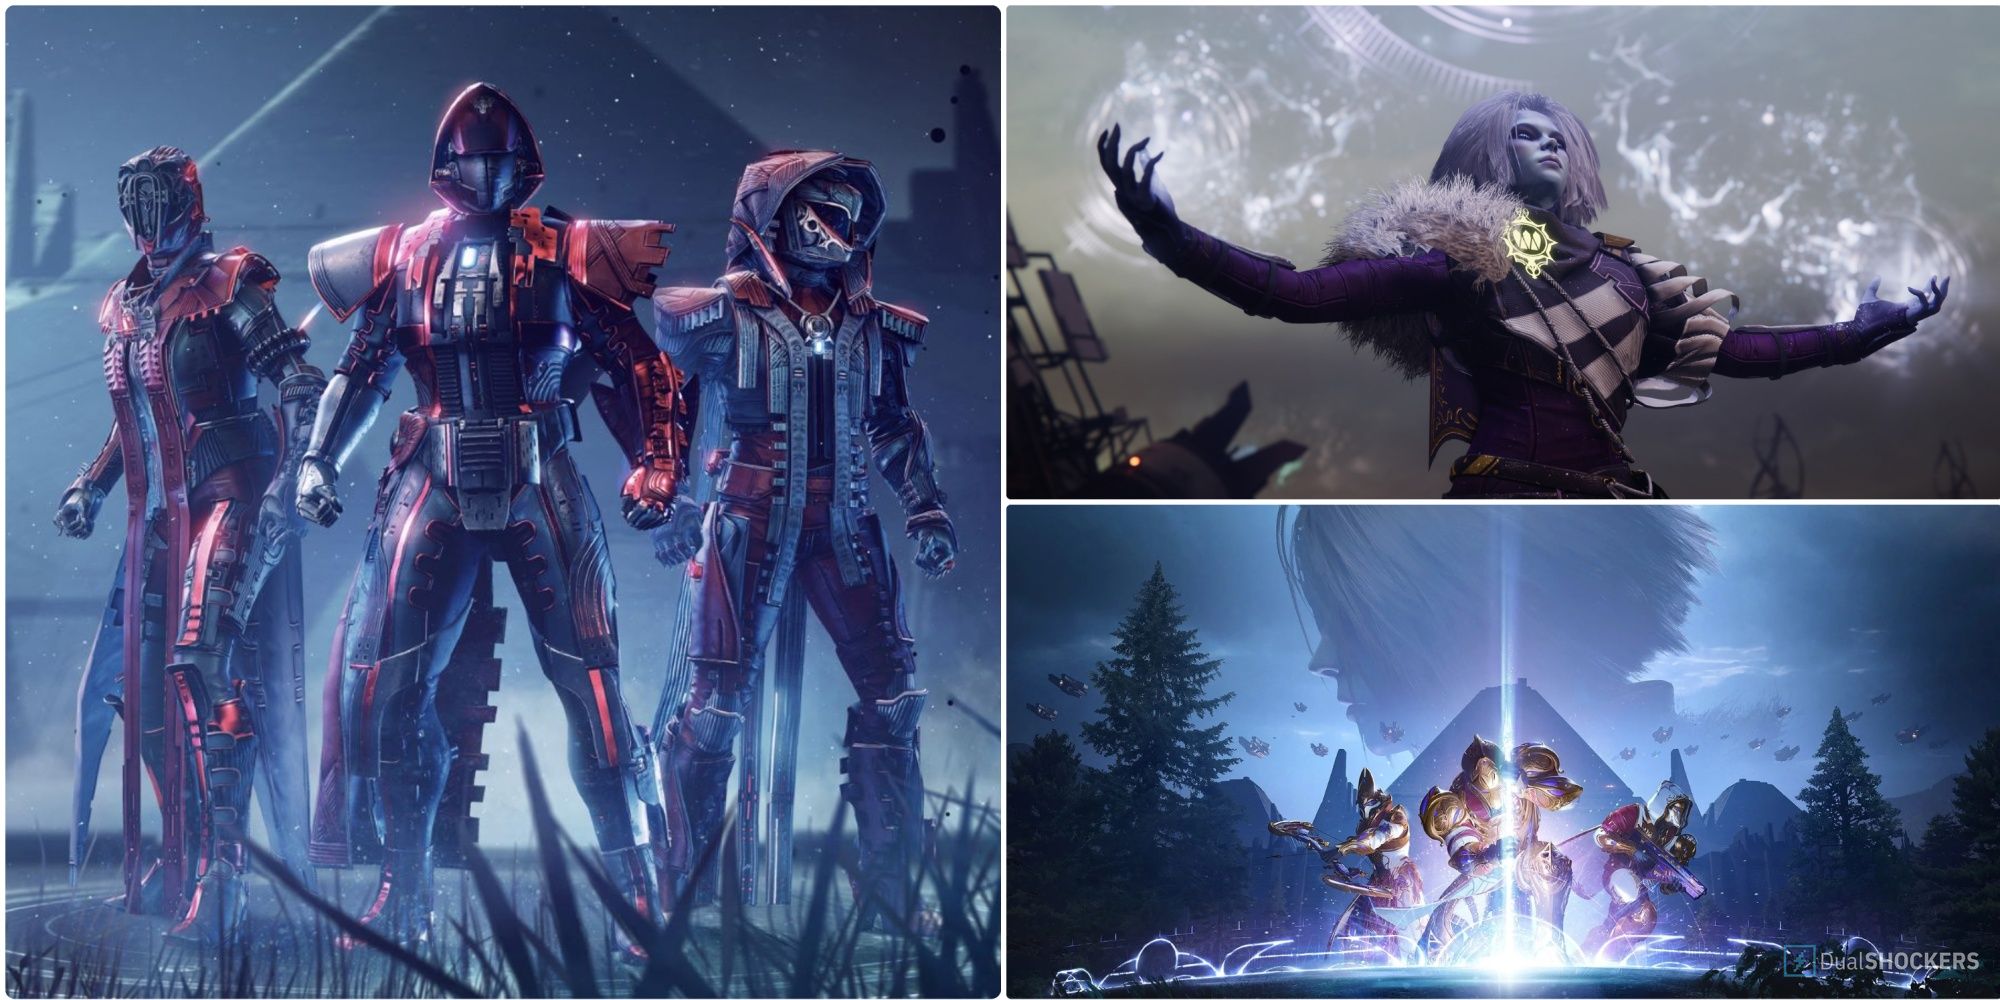 A Collage Of Images From The Season of Defiance in Destiny 2 